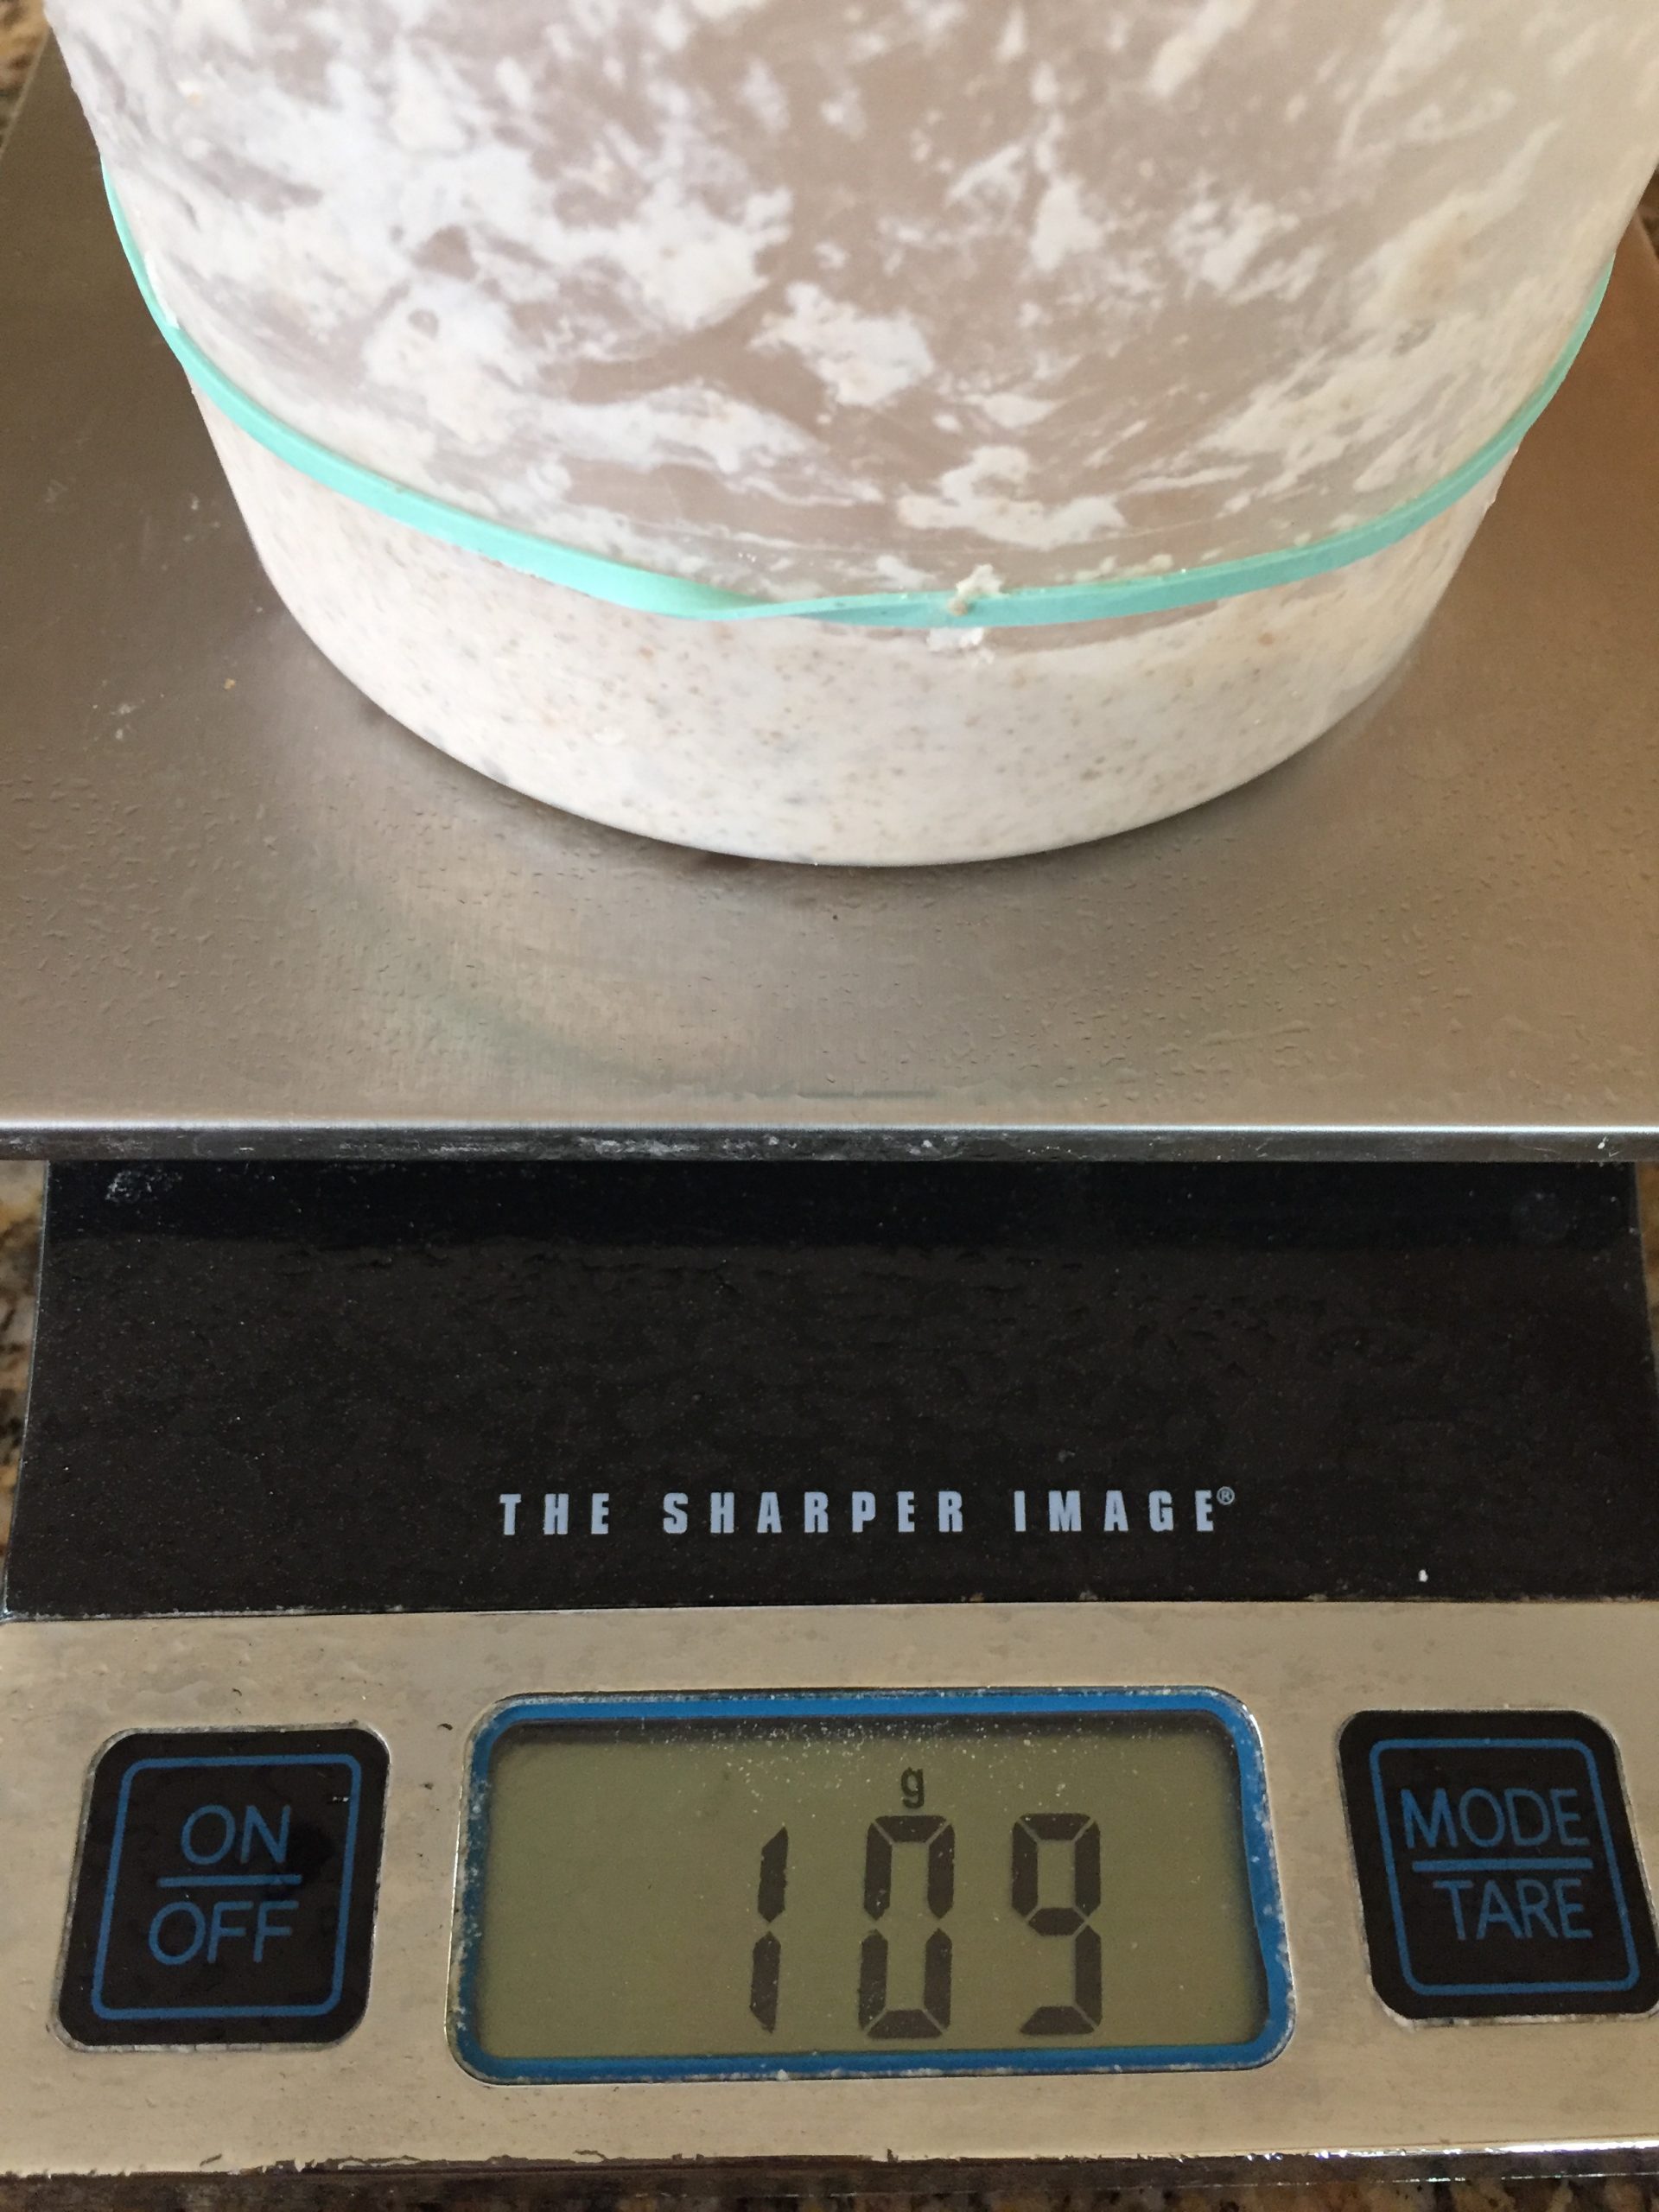 Weighing levain in container on scale